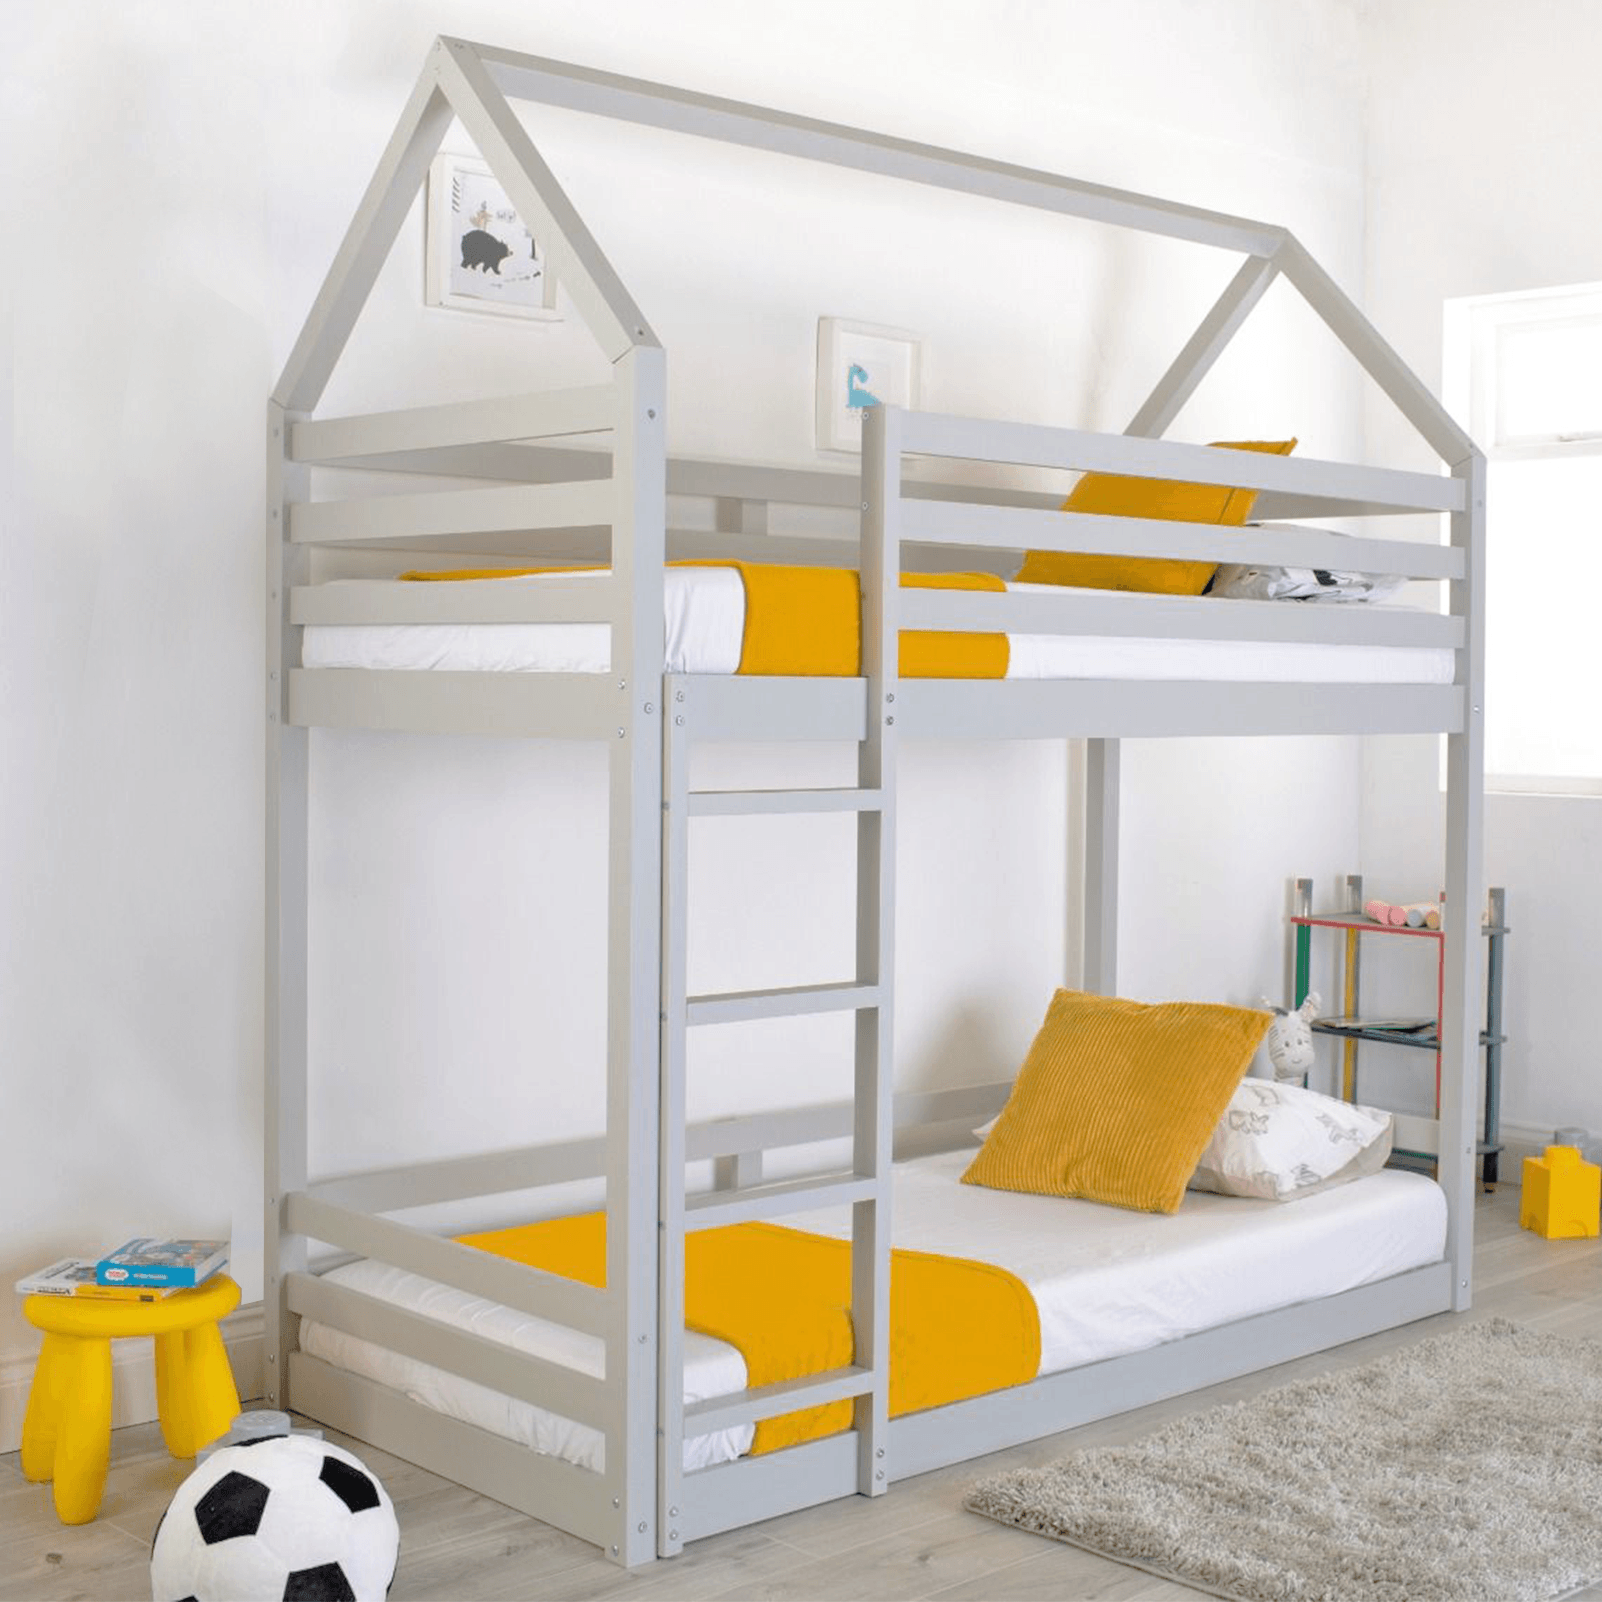 Flair Play House Bunk Bed Frame Grey Pine Wood